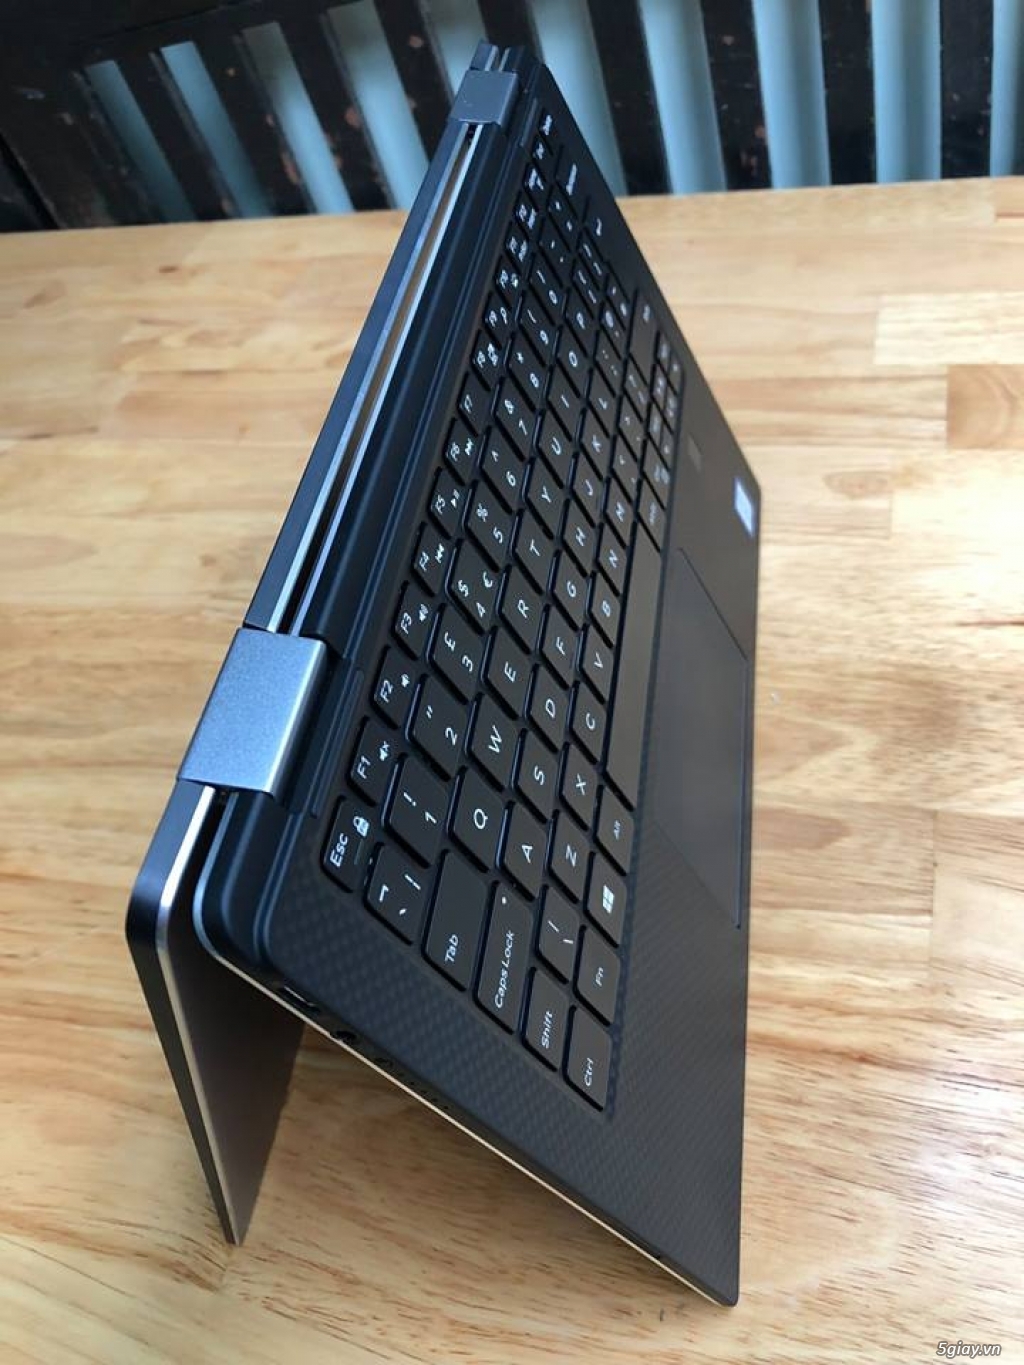 Laptop Dell XPS 9365 - 2 in 1 - 1